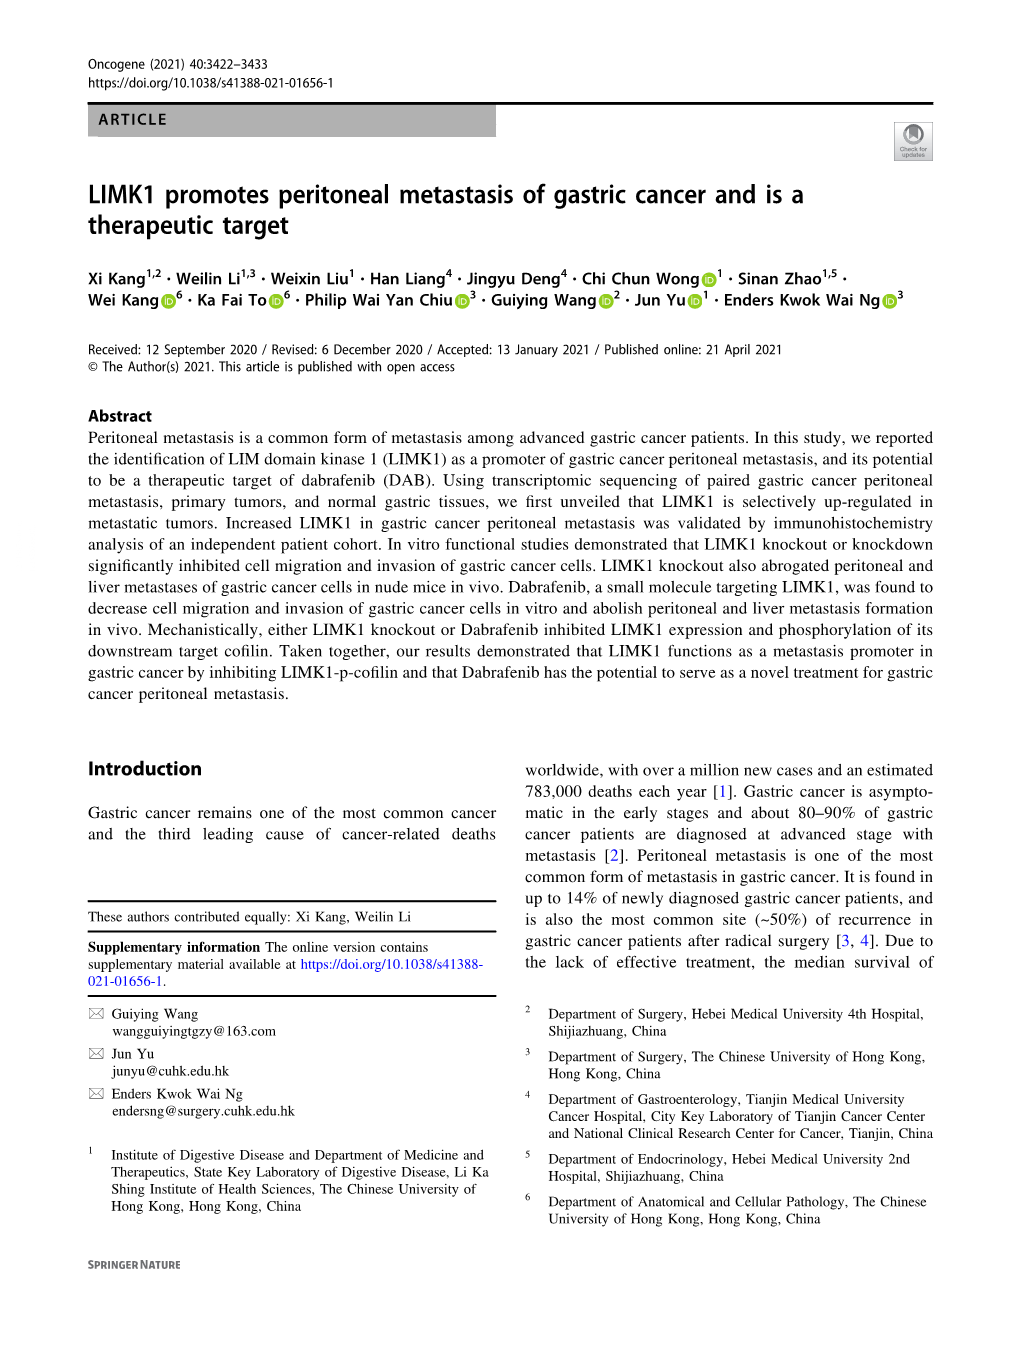 LIMK1 Promotes Peritoneal Metastasis of Gastric Cancer and Is a Therapeutic Target